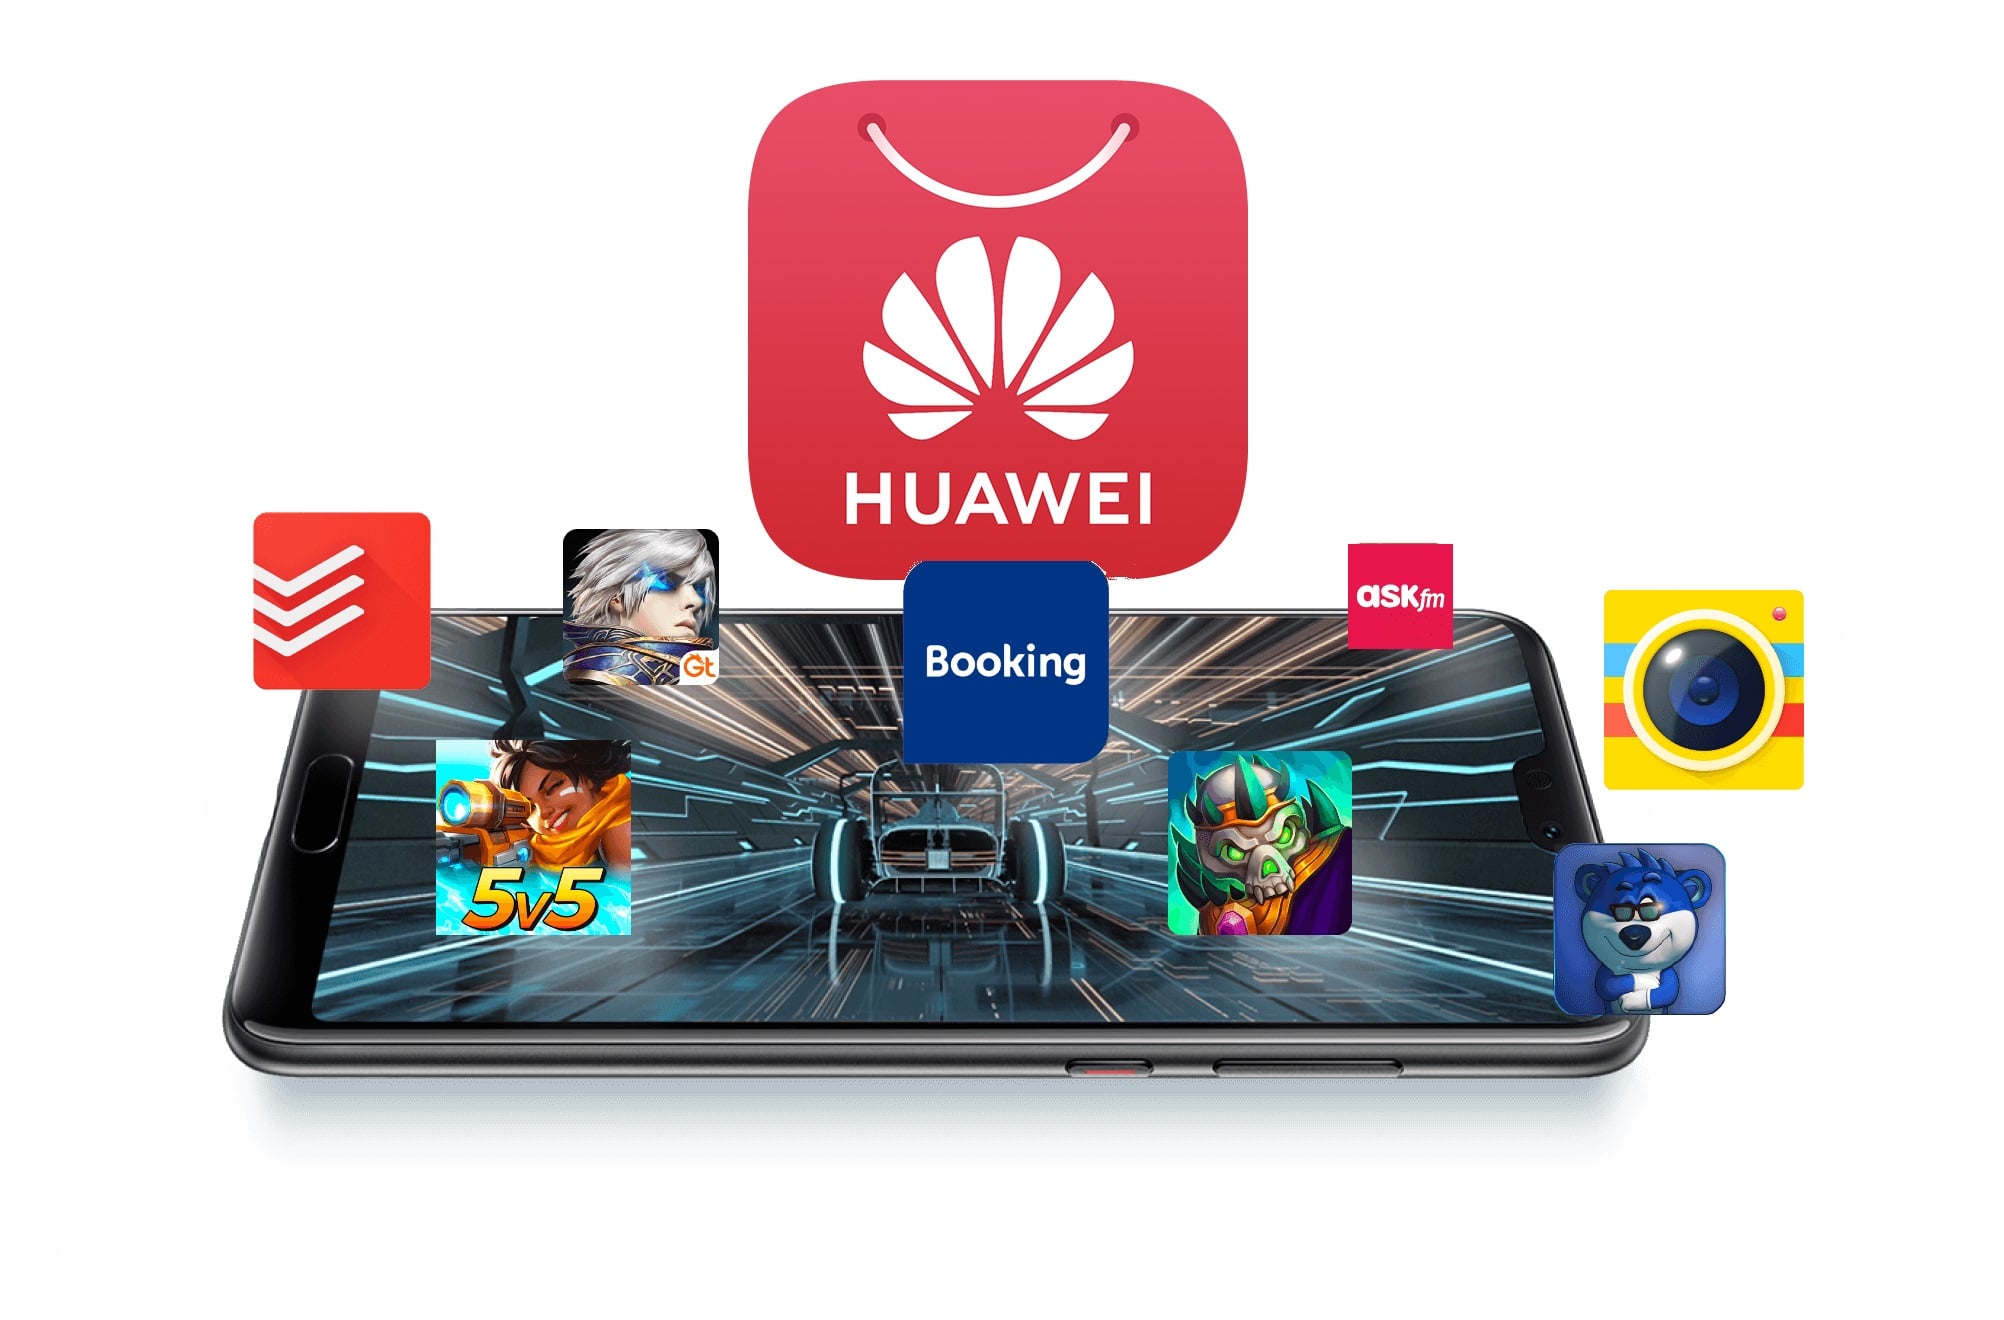 install the Huawei AppGallery store